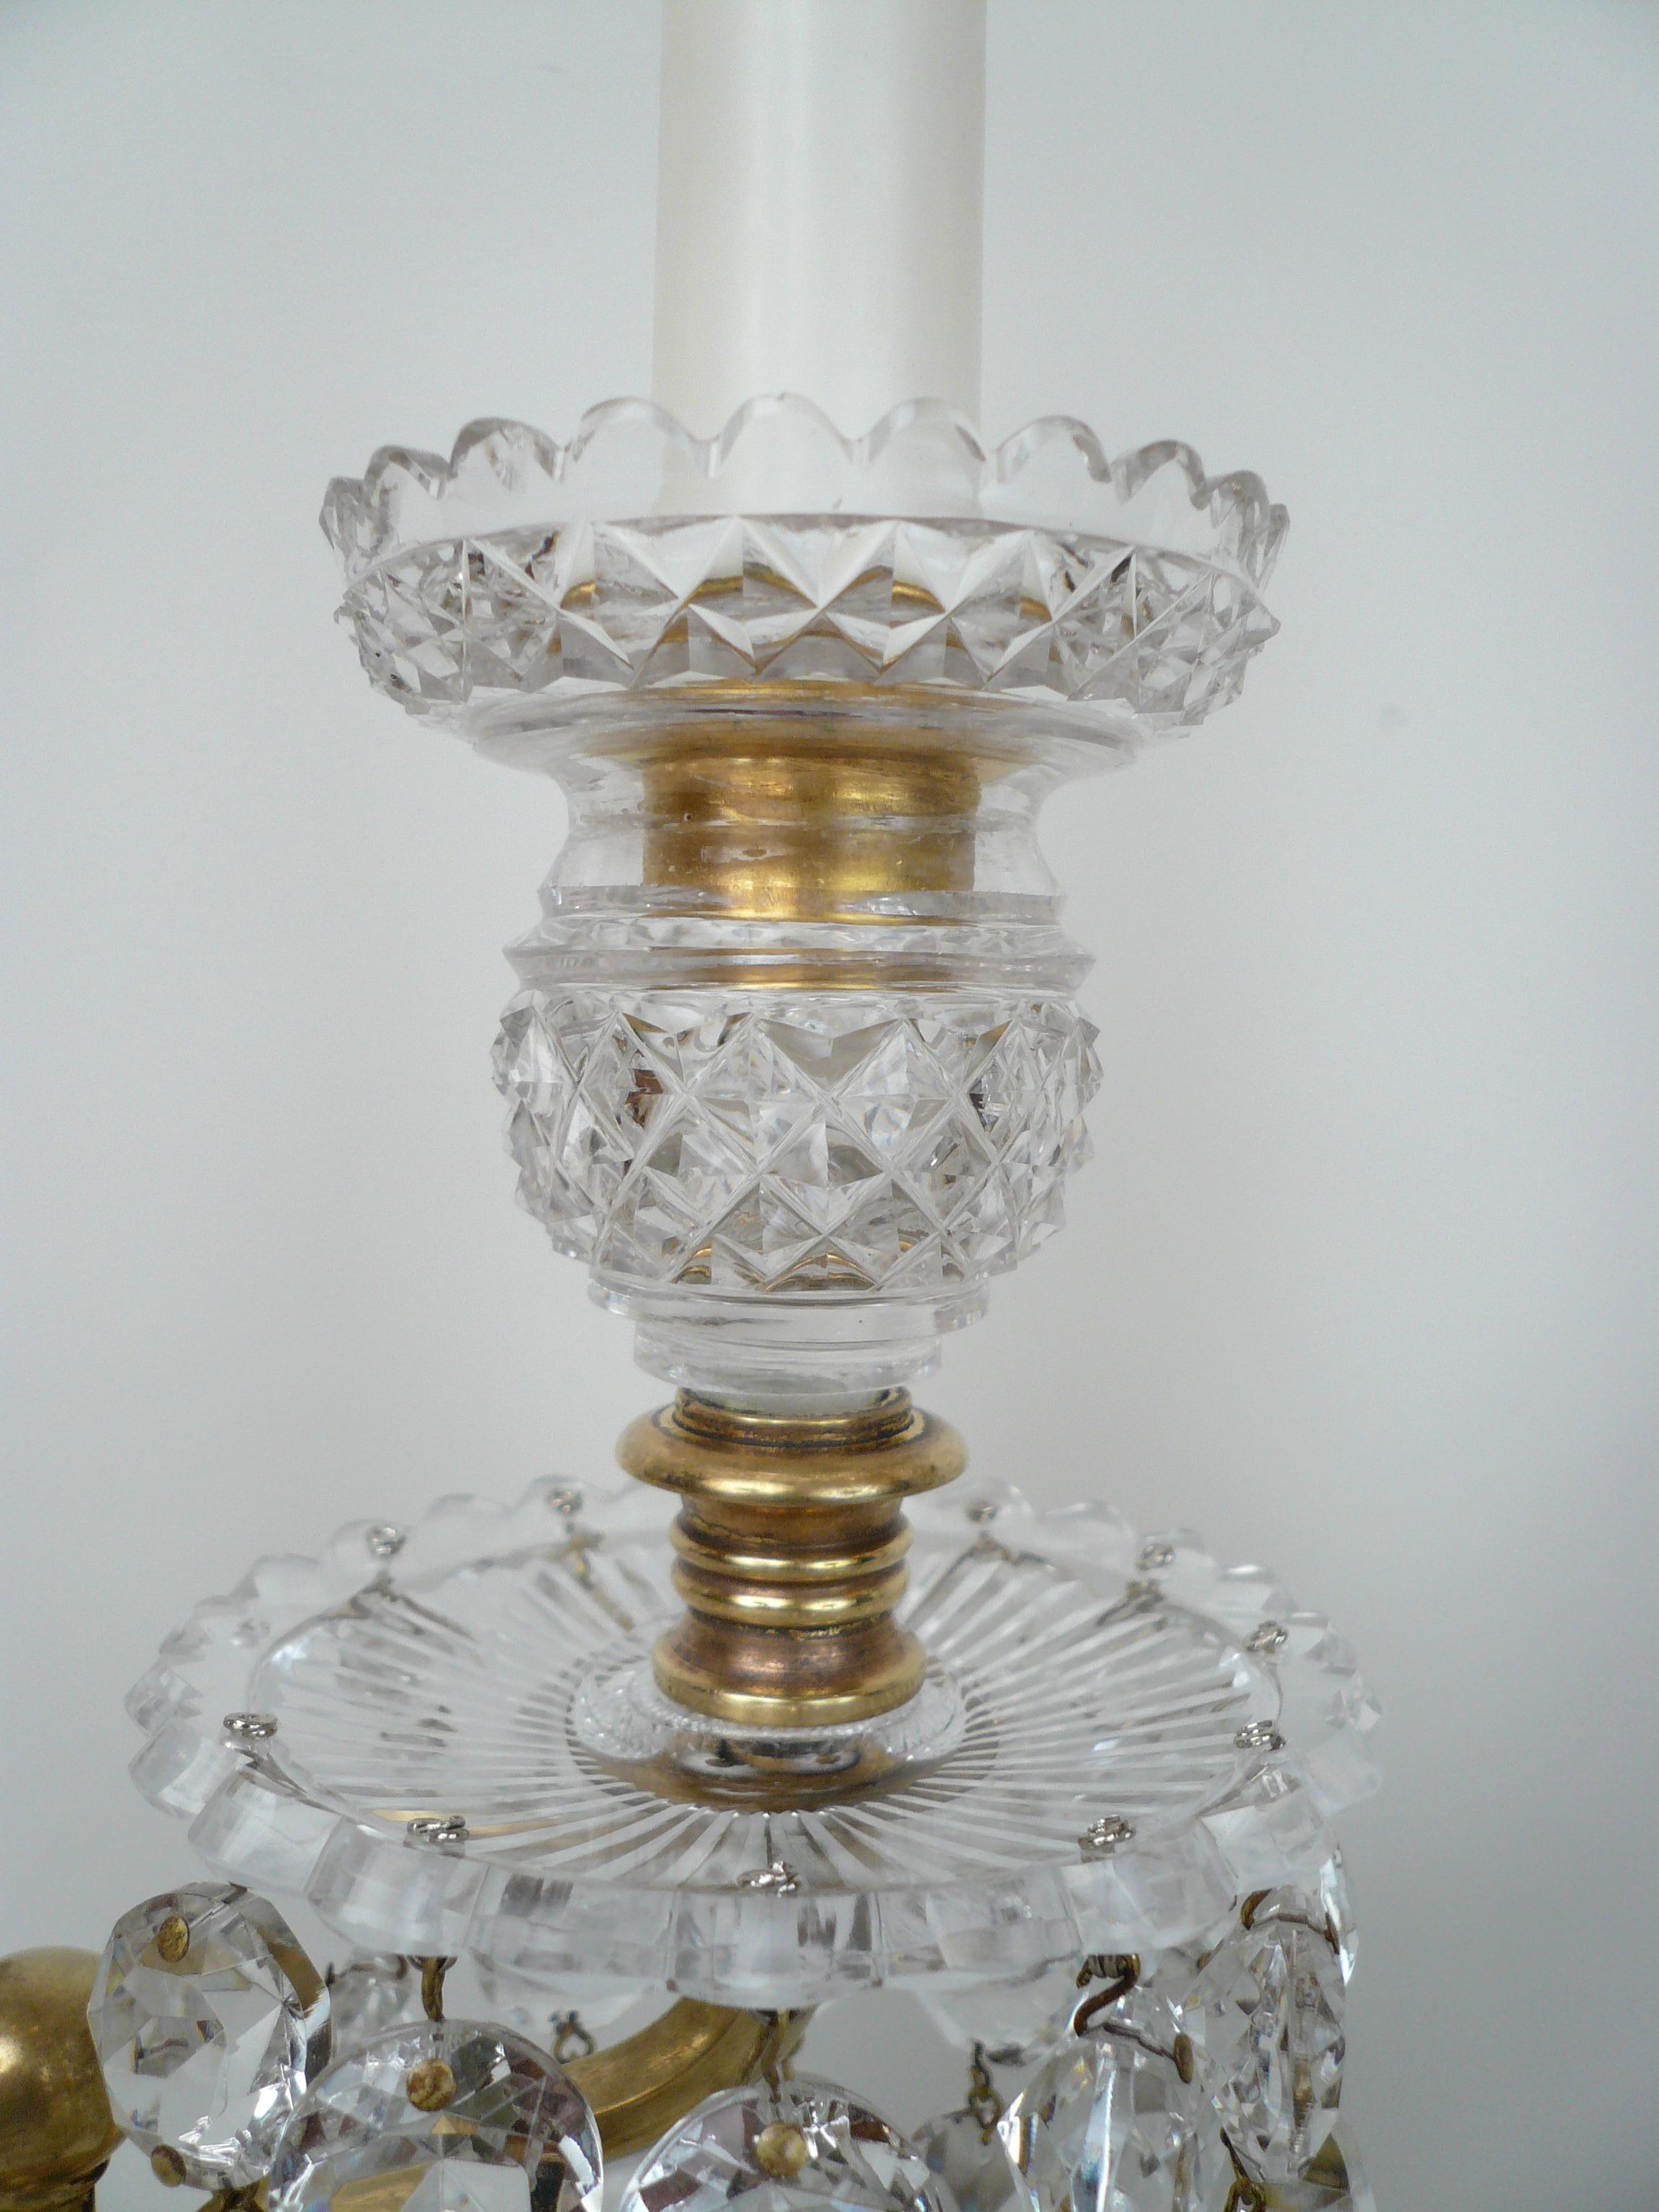 19th Century Pair English Regency Cut Glass Candelabra or Lustres Attributed to John Blades For Sale